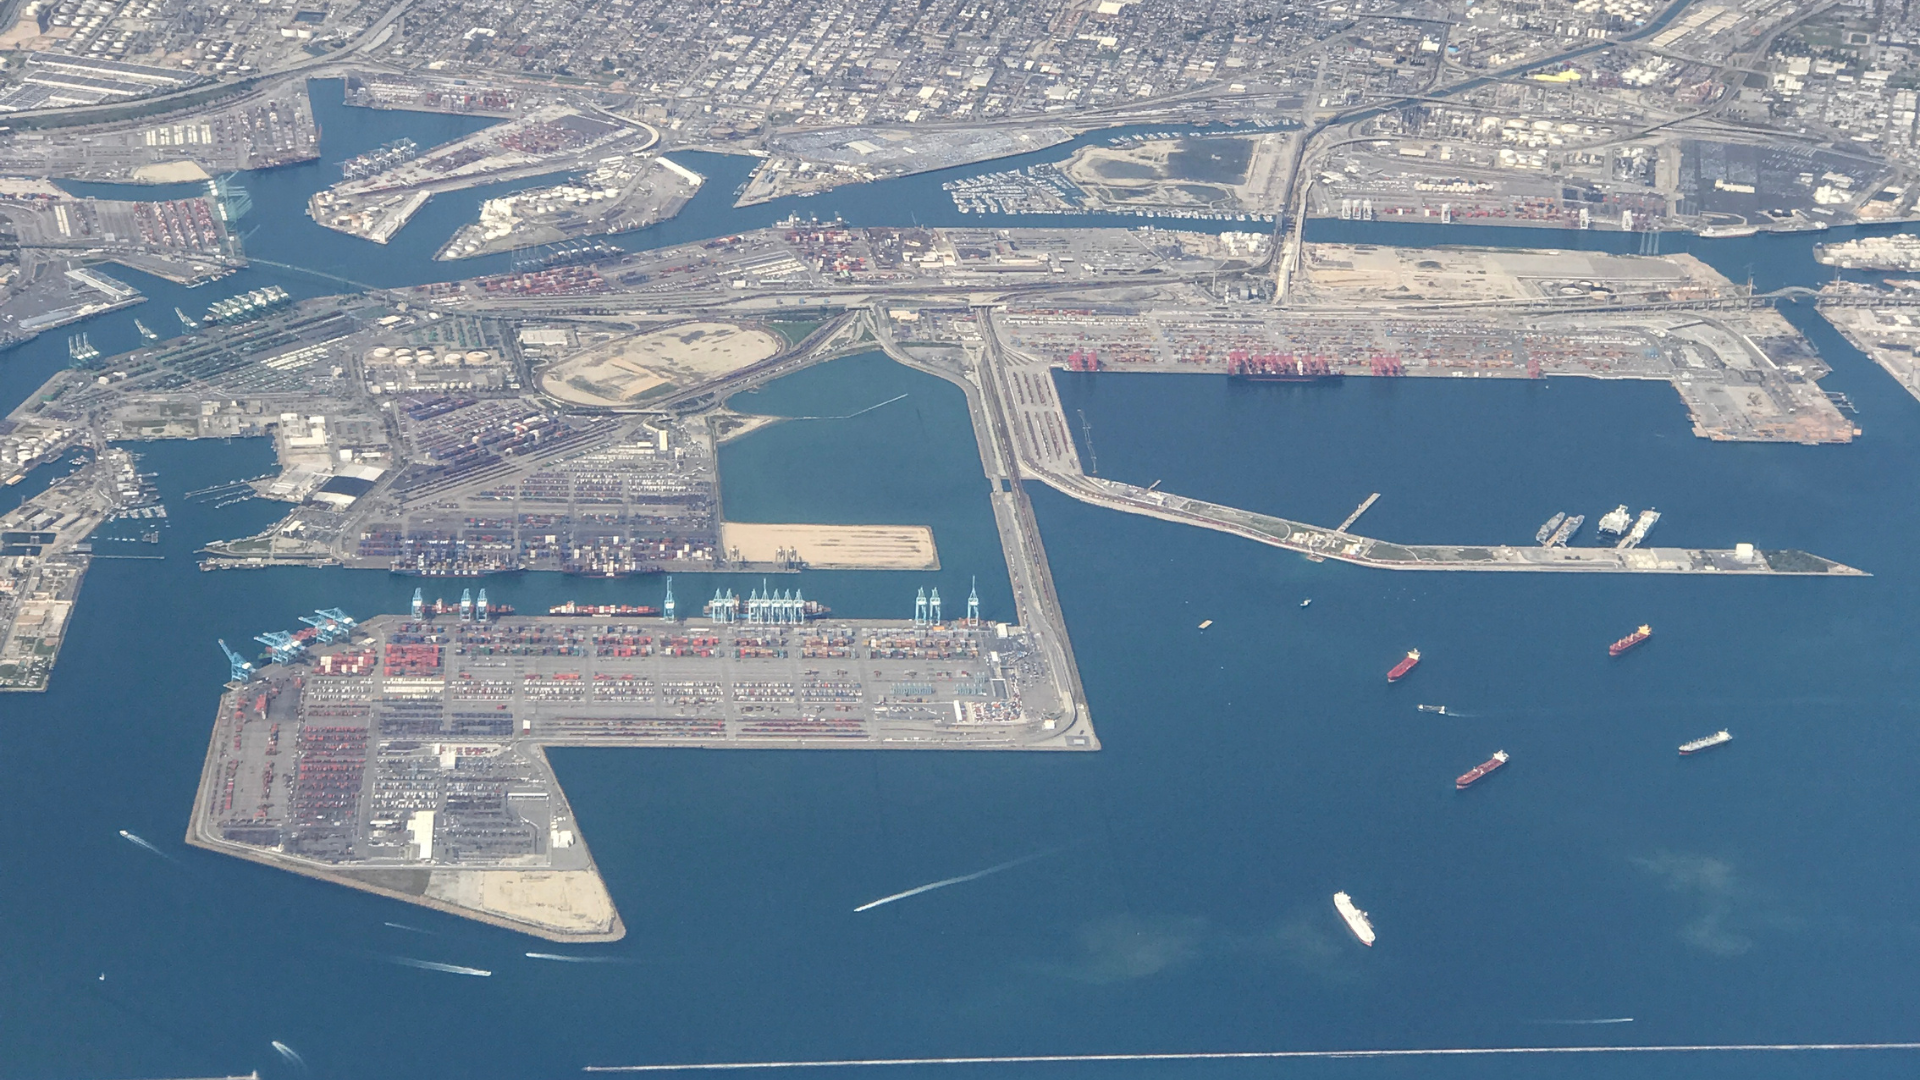 Aerial view of Long Beach Port, a commercial port near Los Angeles, California.